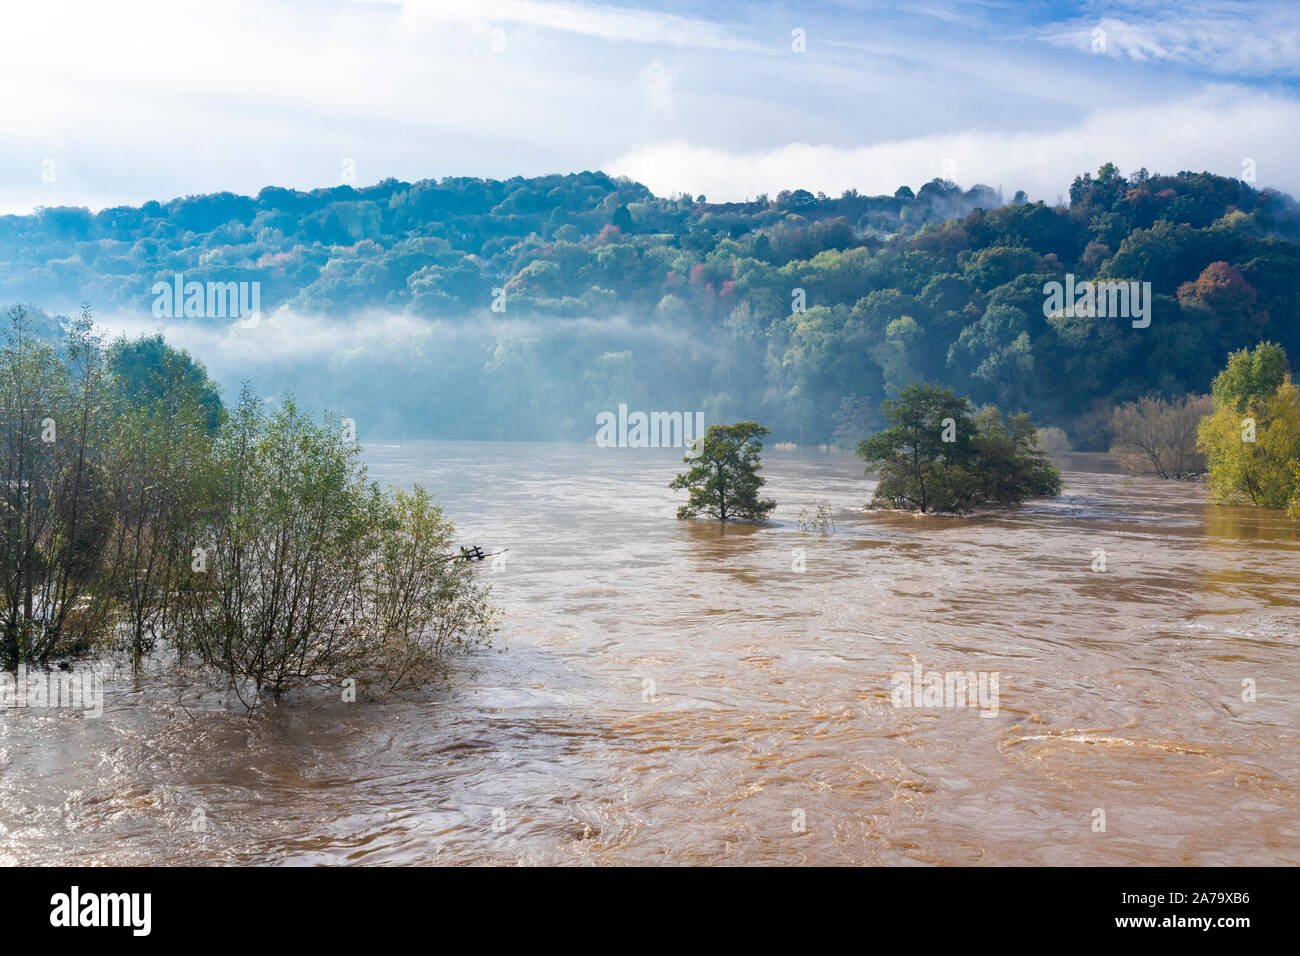 The muddy, silty waters of the River Wye in flood on 28.10.2019 at Kerne Bridge, Herefordshire UK - The flooding was caused by heavy rain in Wales. Stock Photo